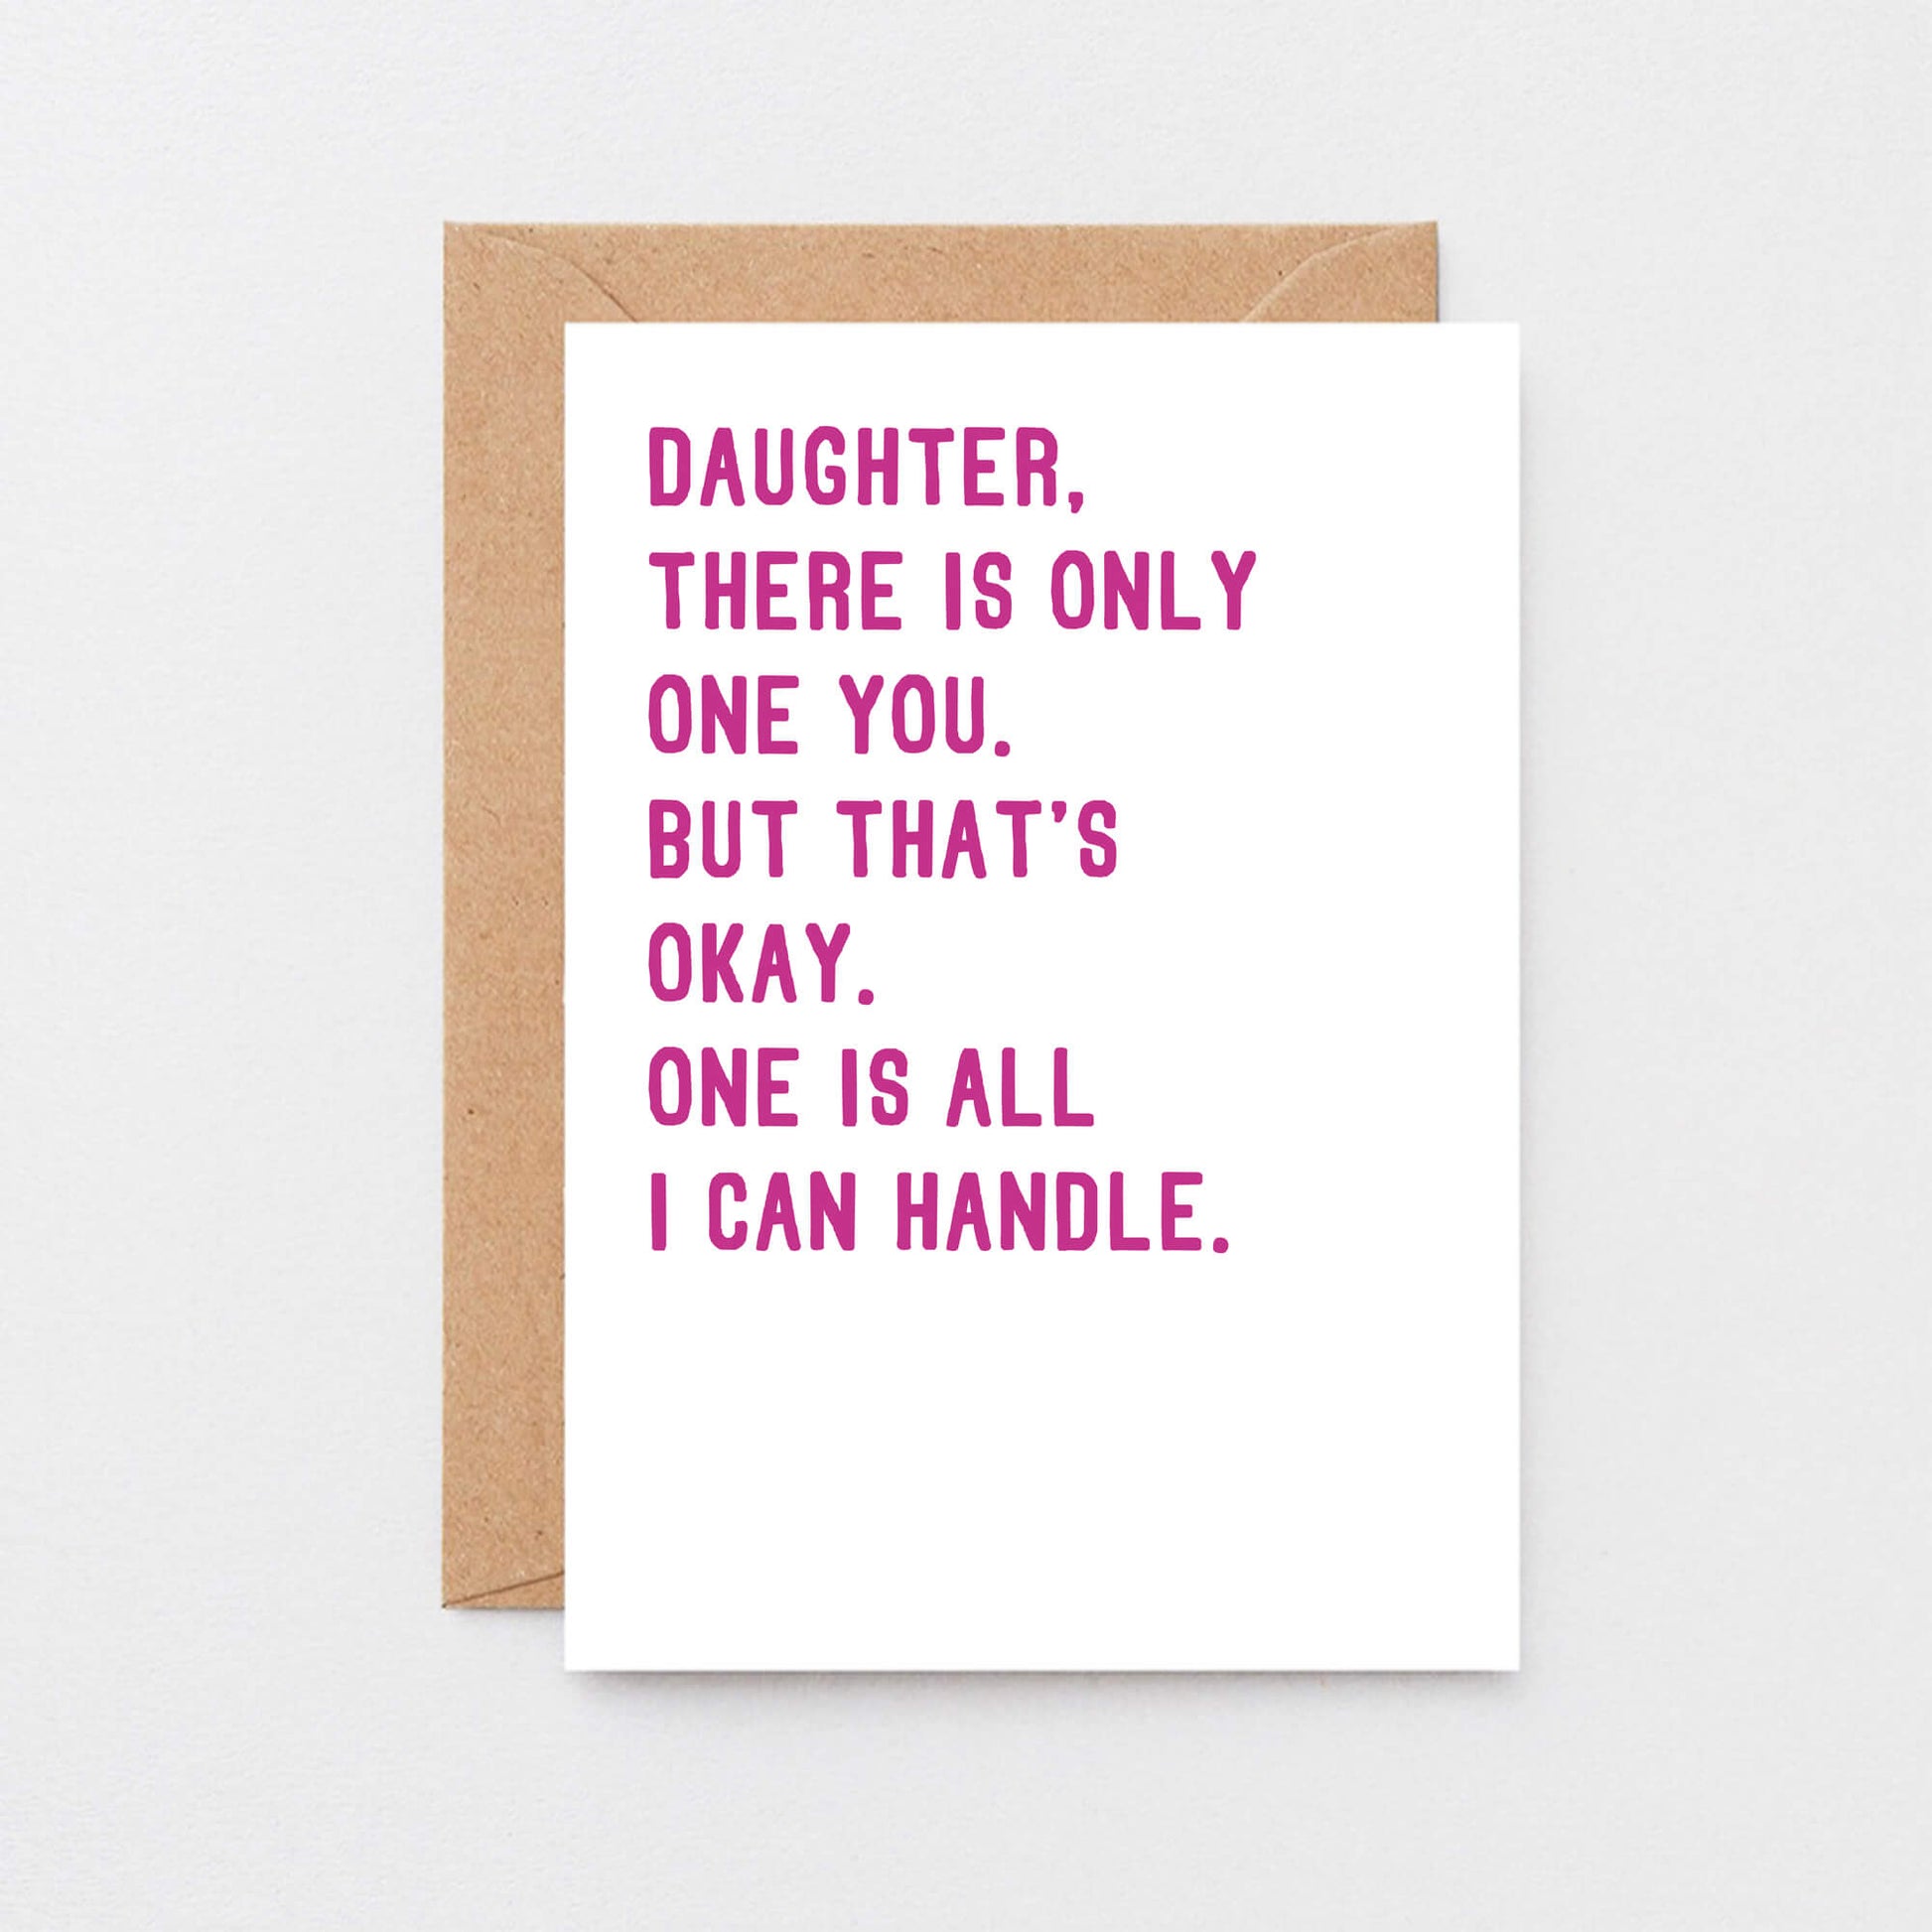 Daughter Card by SixElevenCreations. Reads Daughter, there is only one you. But that's okay. One is all I can handle. Product Code SE2020A6